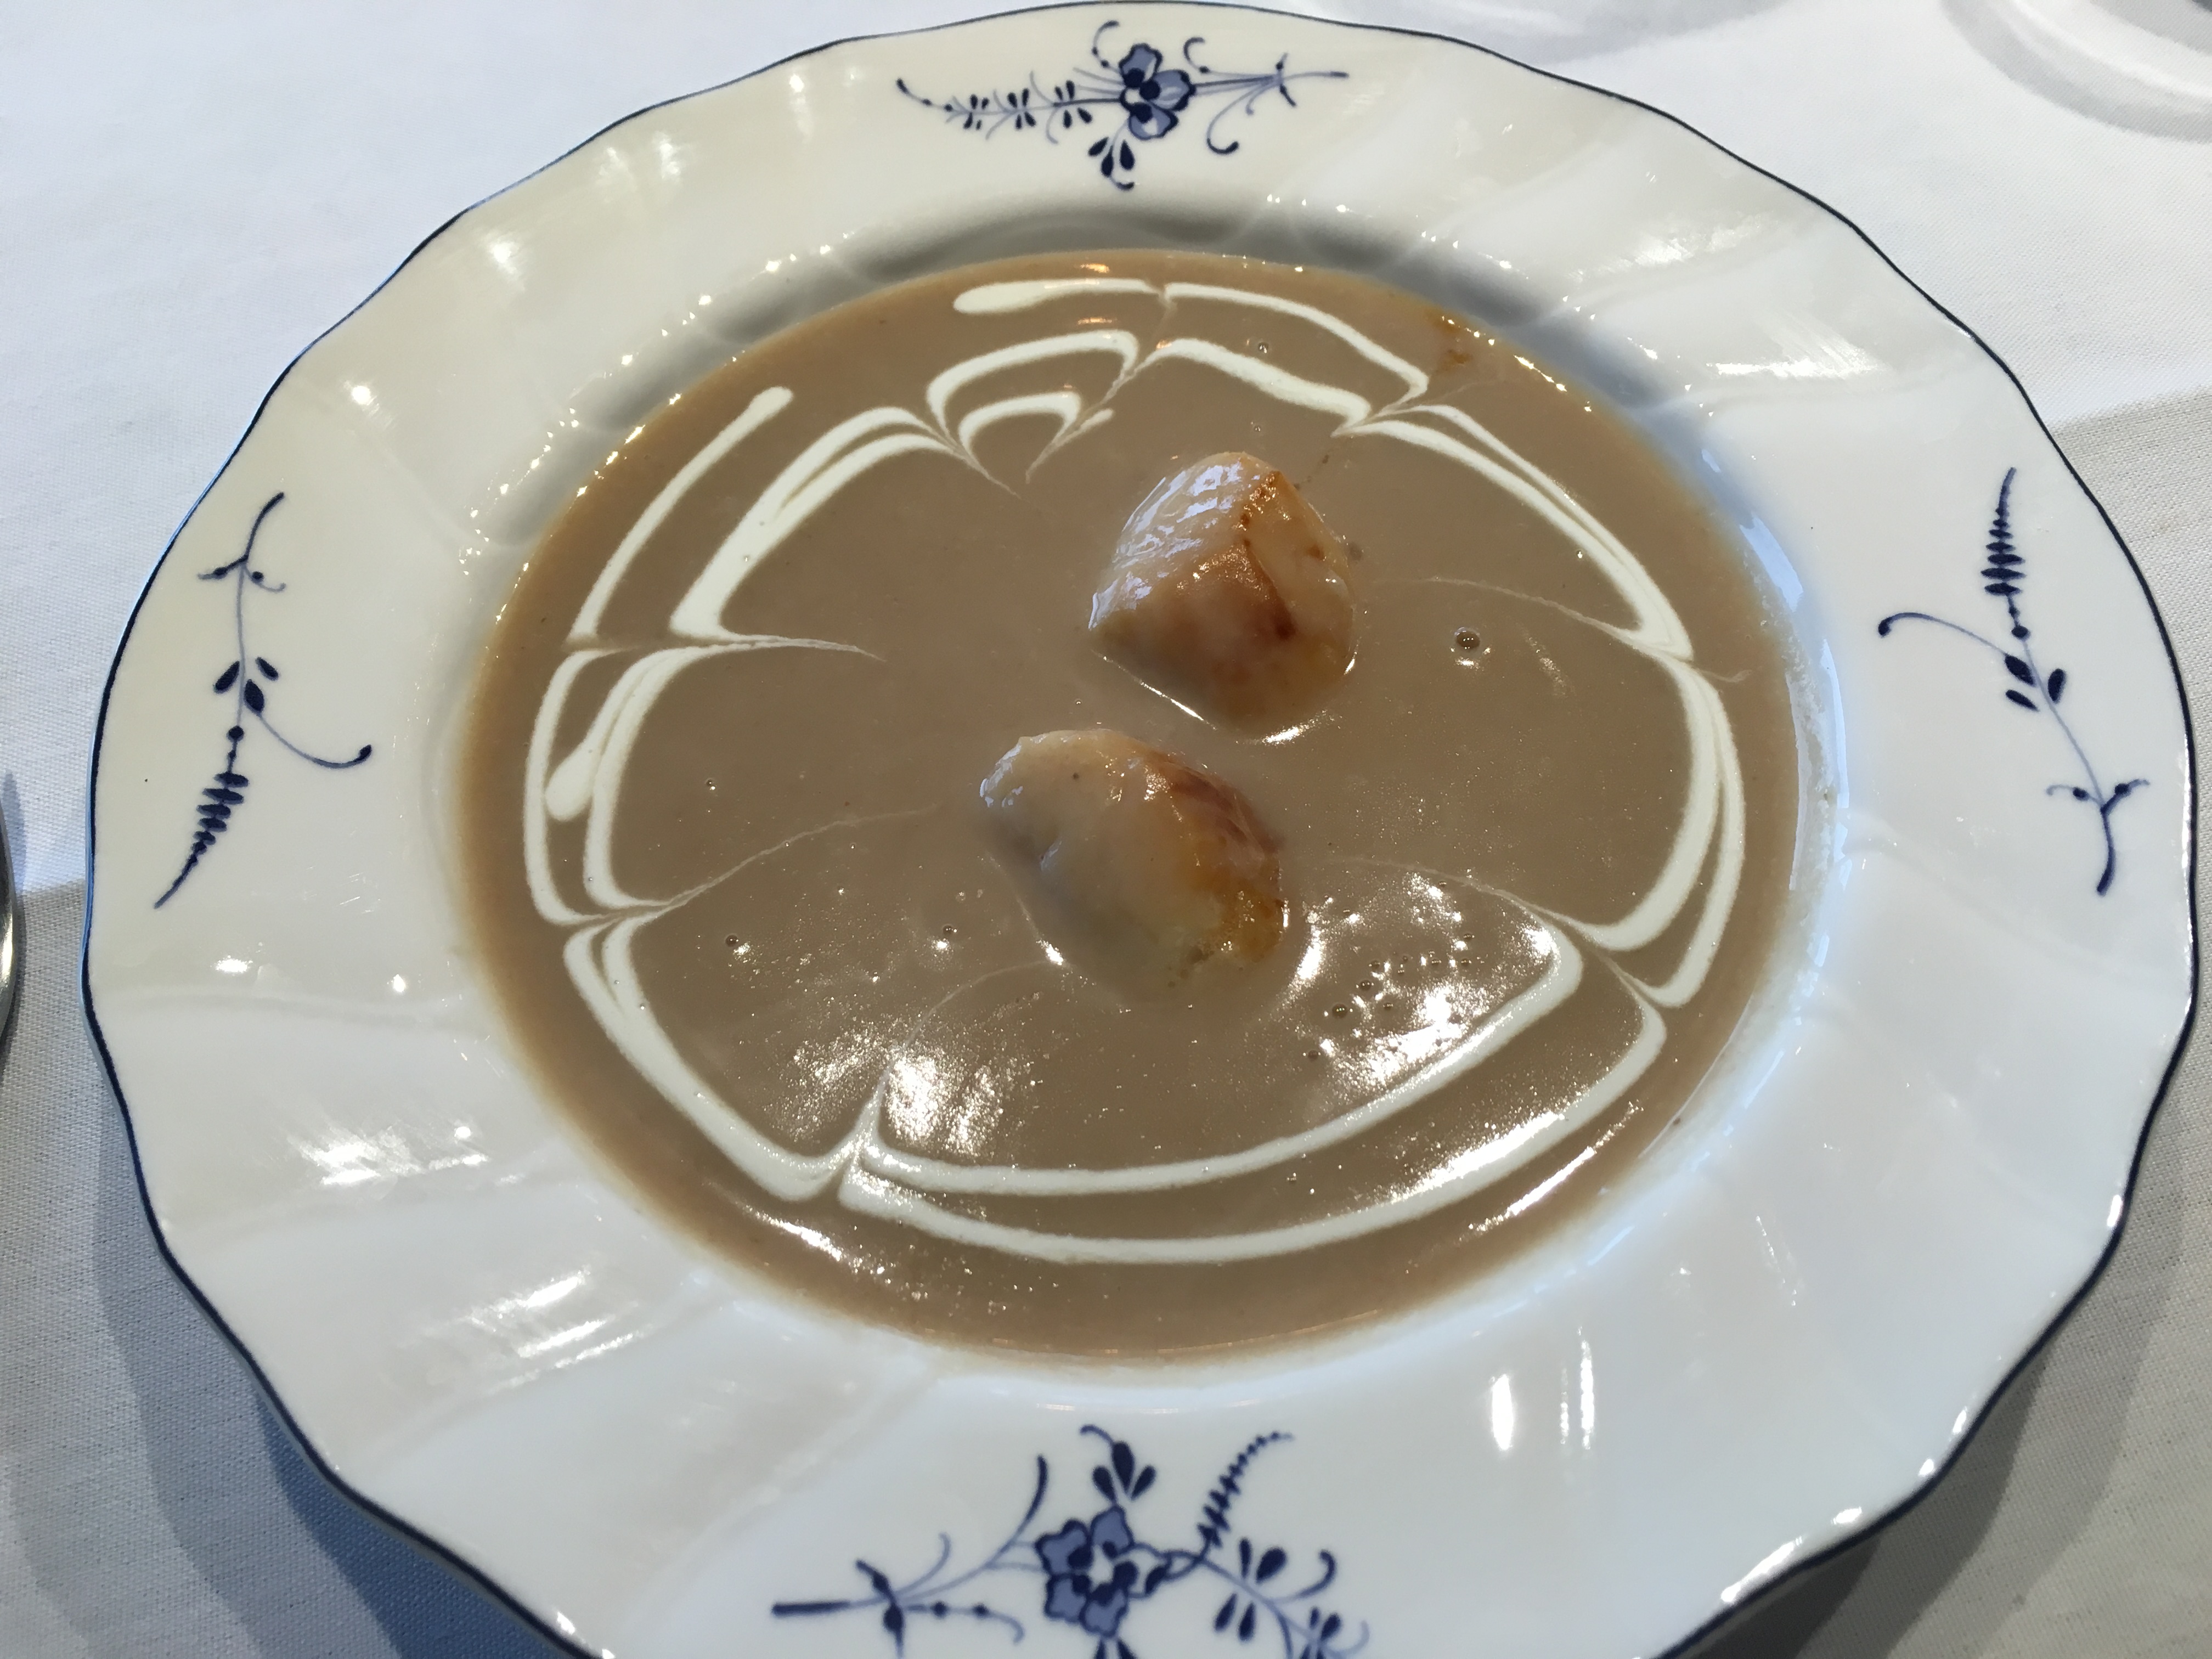 Roasted Chestnut Soup with Seared Scallops - European Waterways